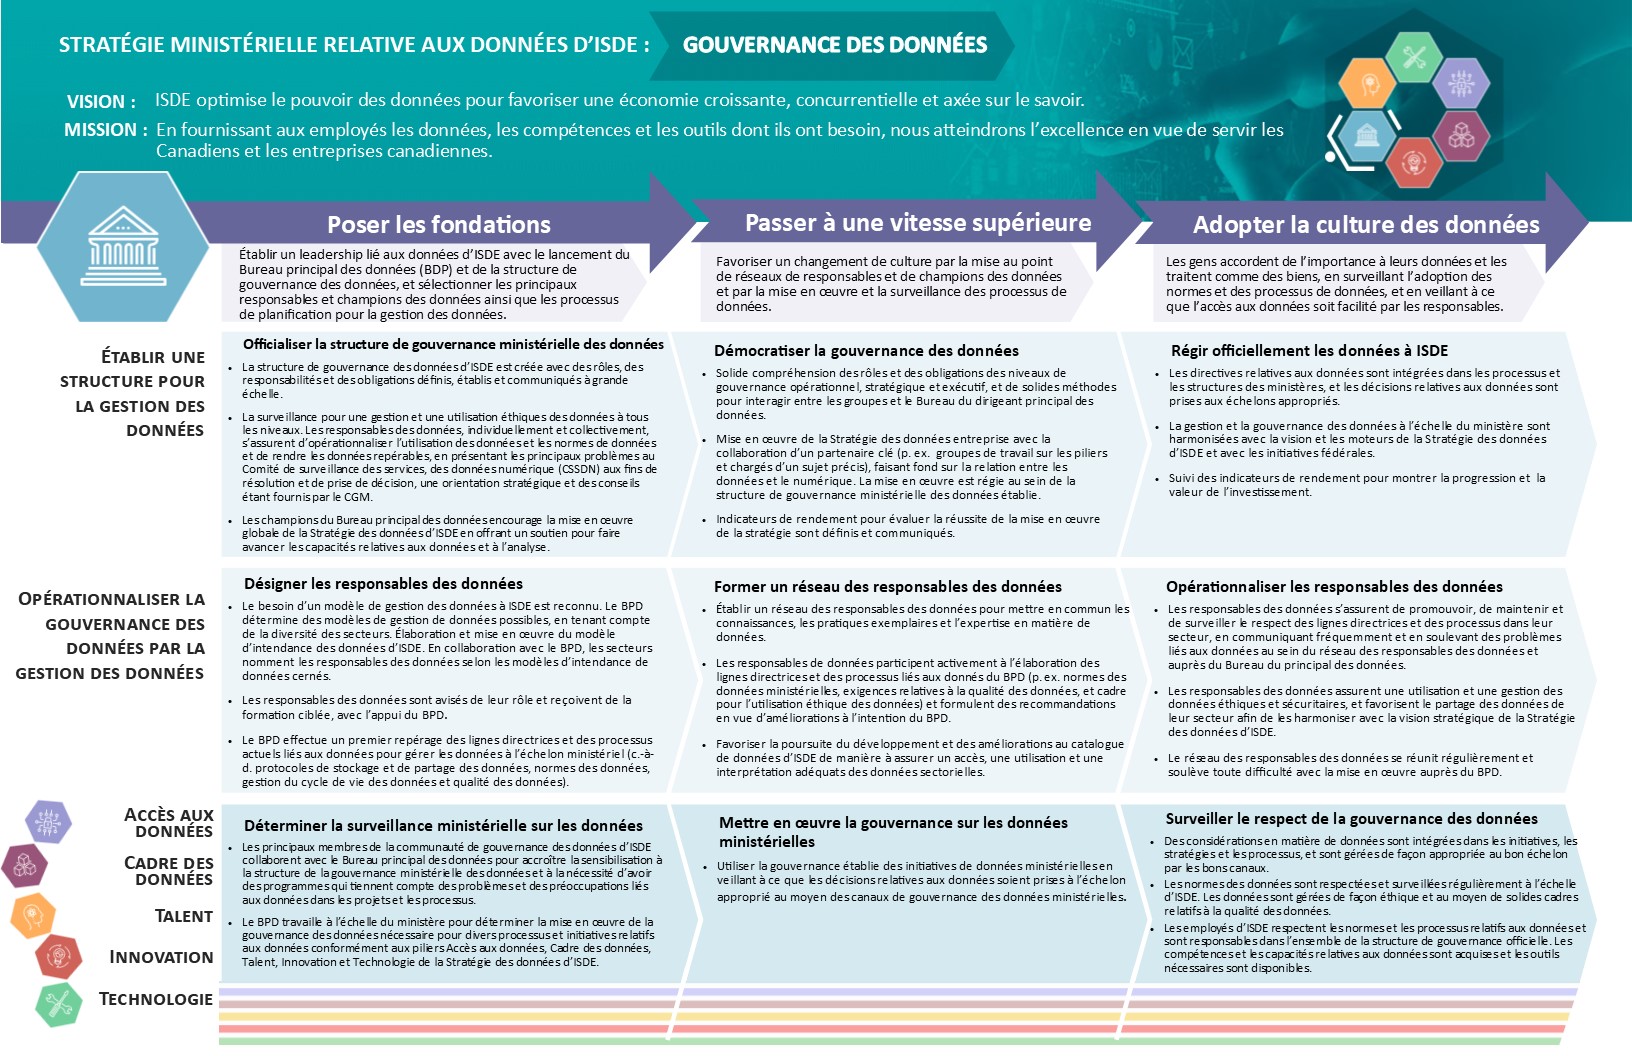 ISED Data Strategy-Data Governance Placemat-FR.jpg